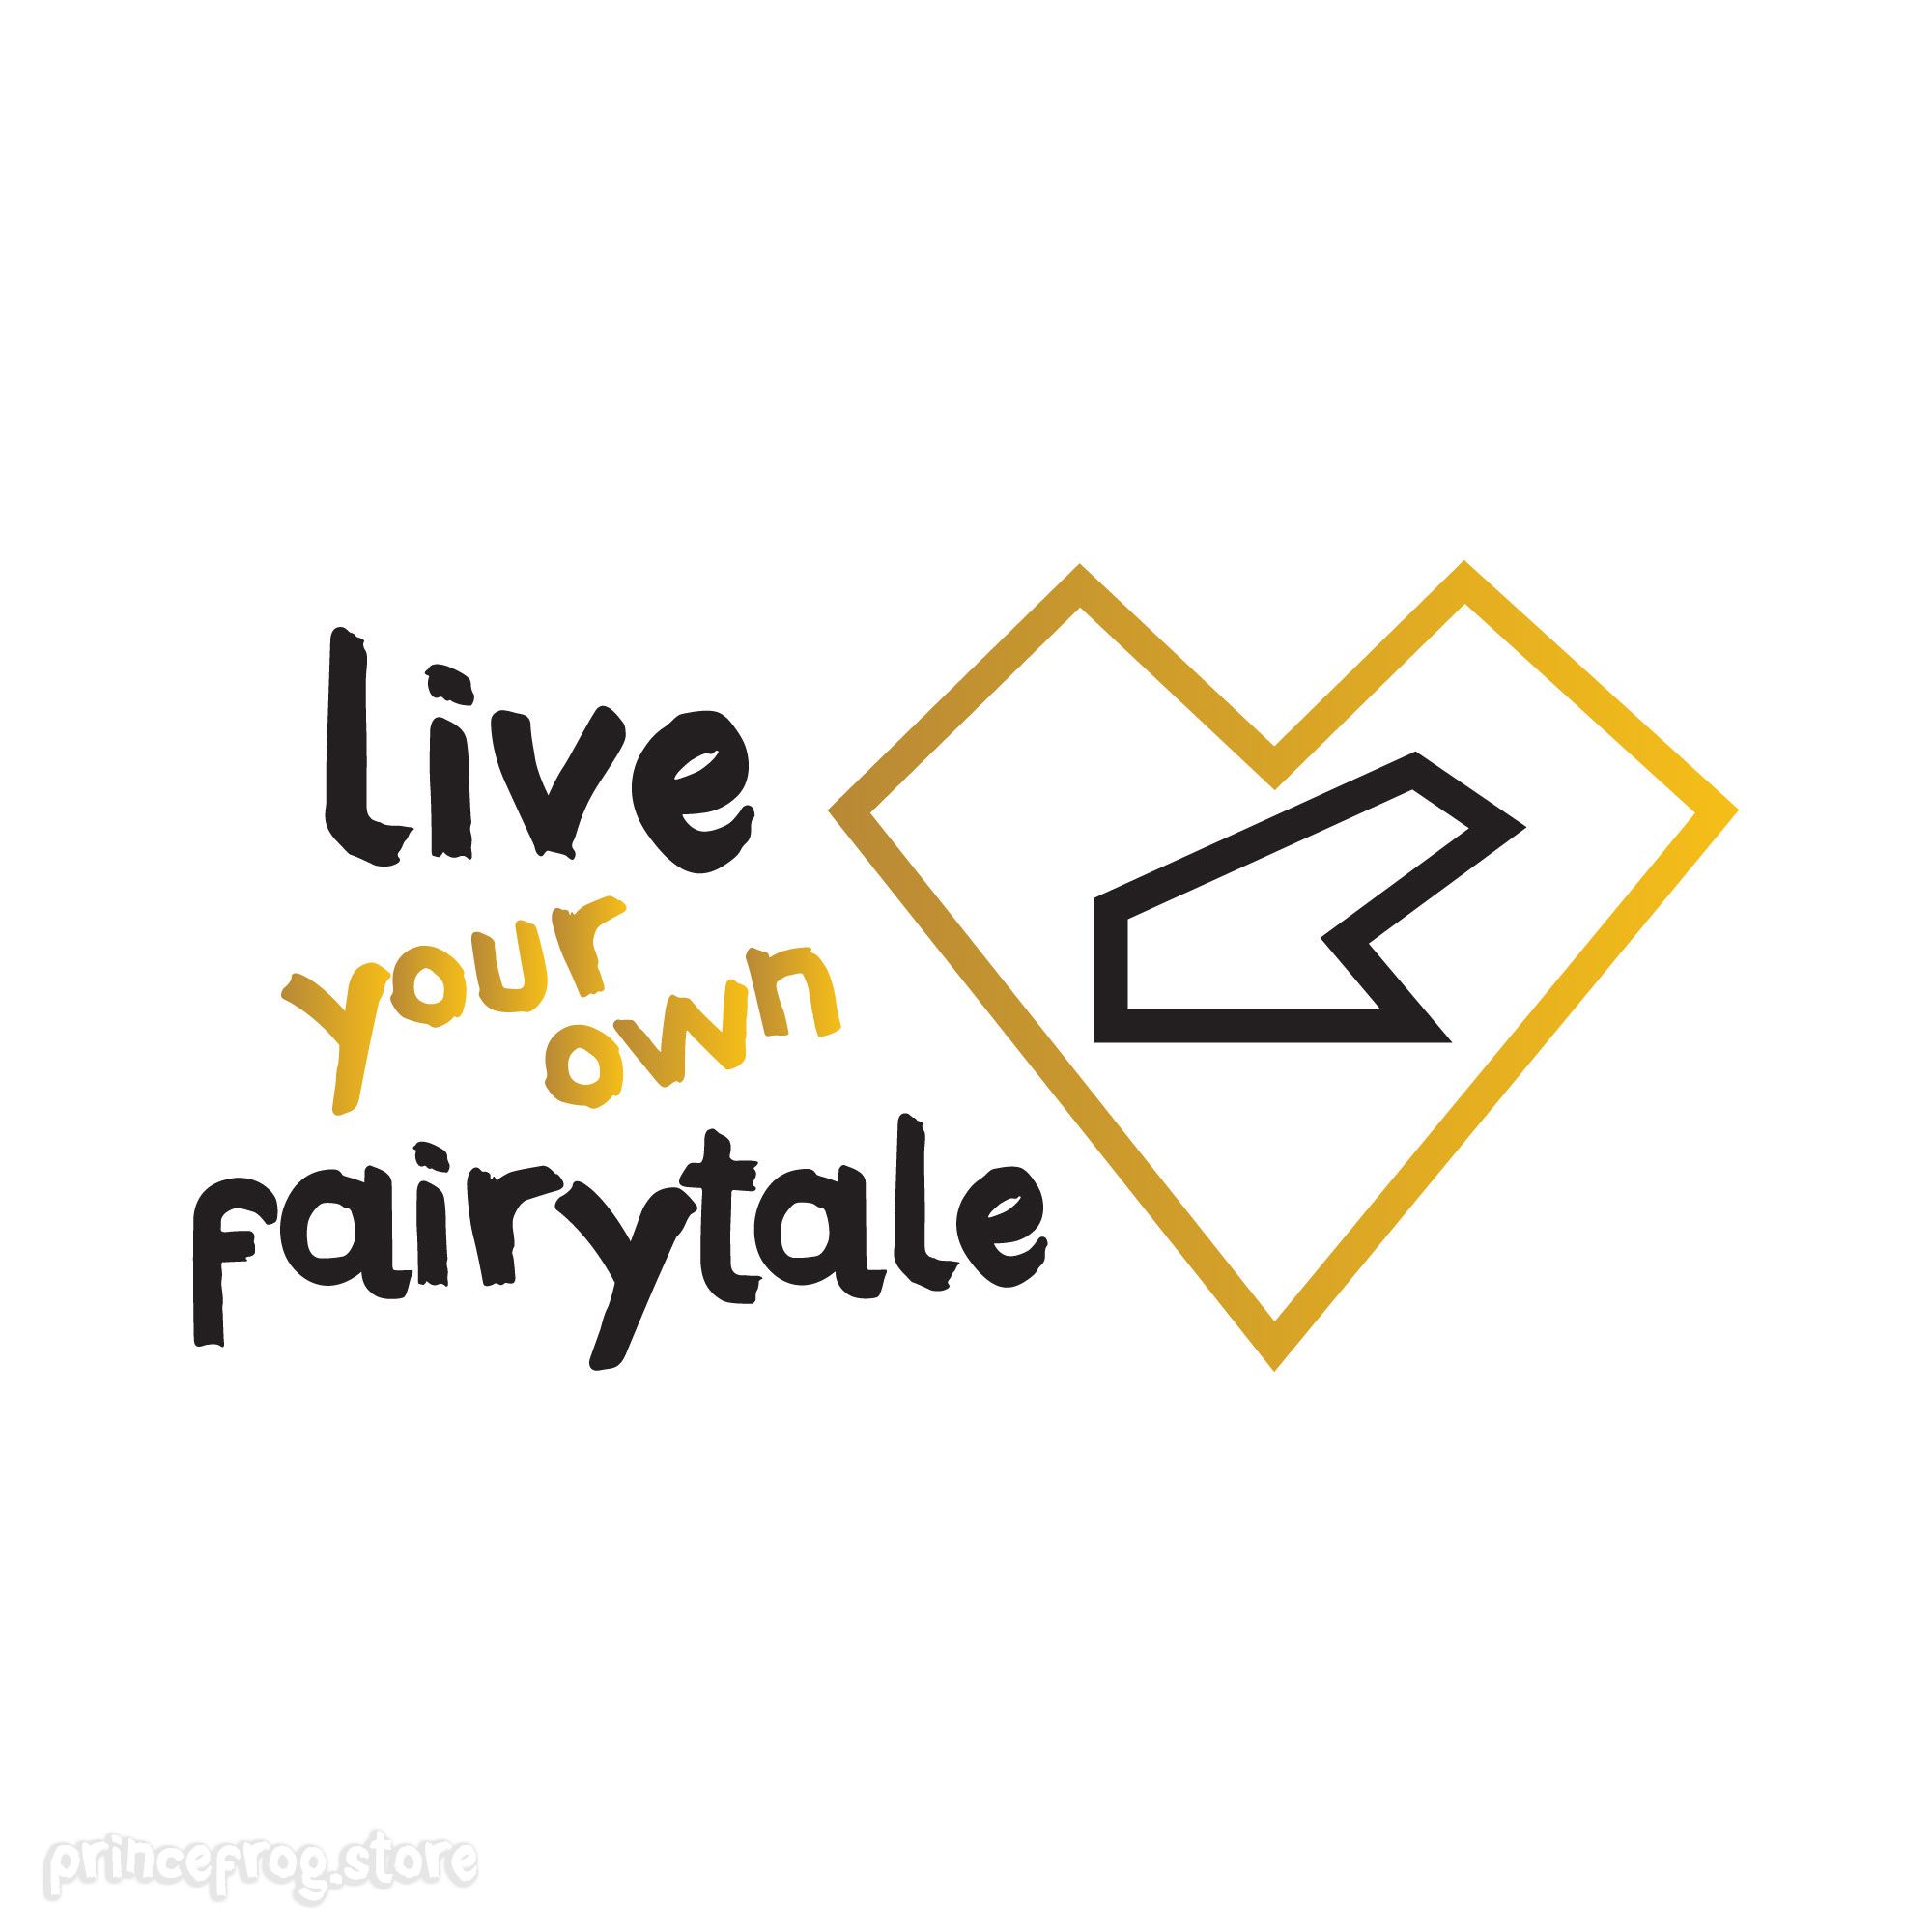 Shopping bag Live your our own fairytale 7